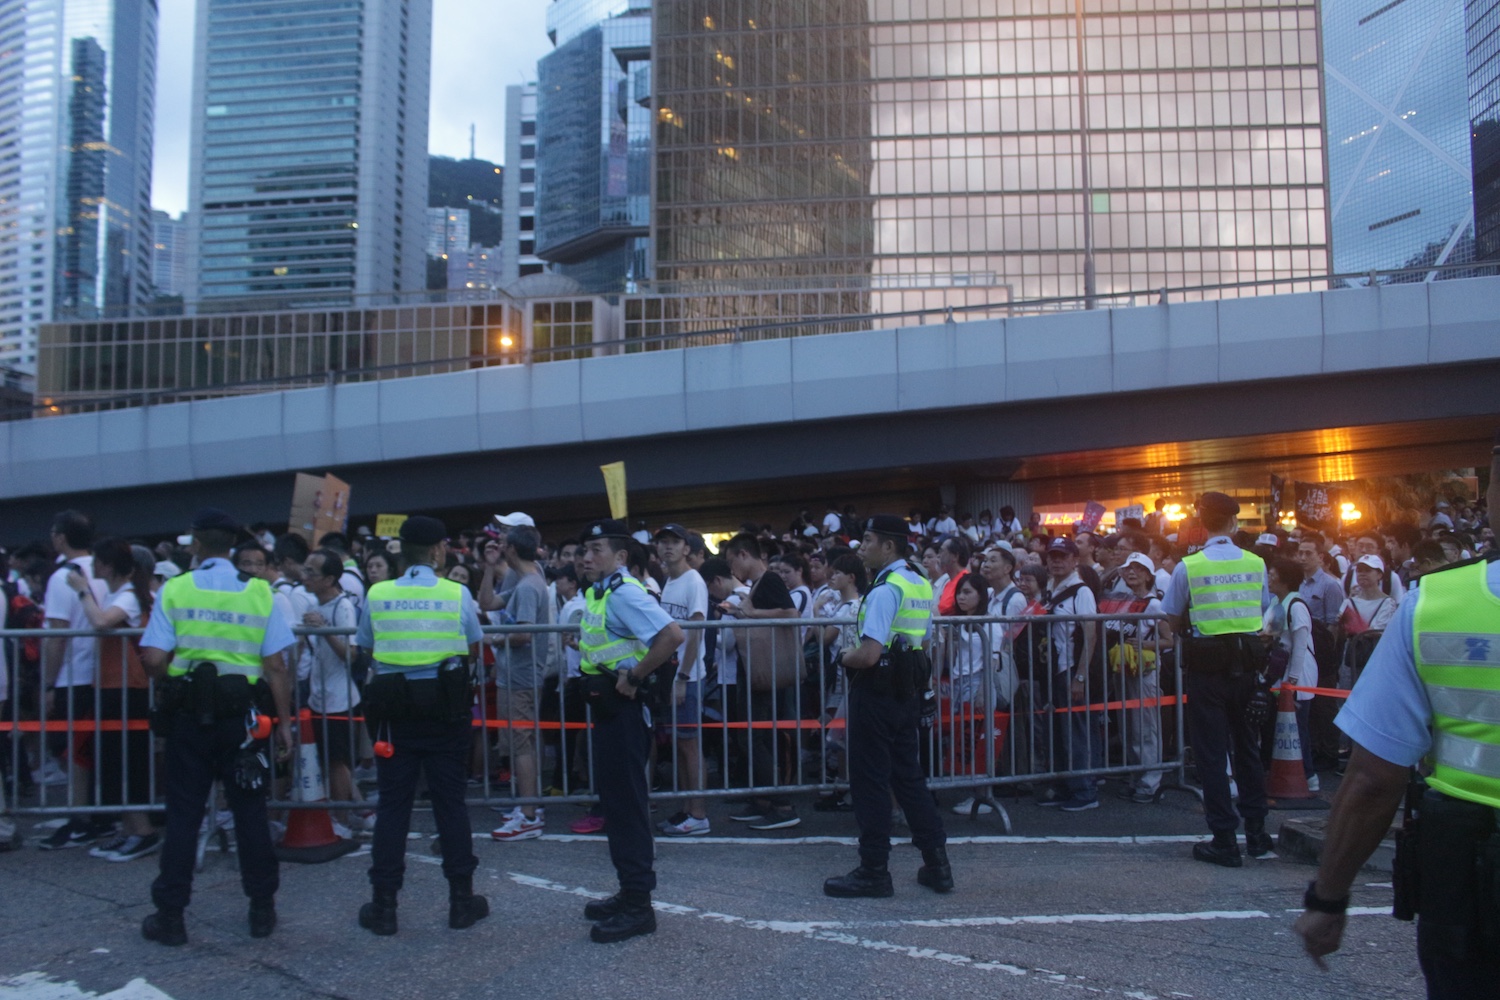 Police man a barricade as anti-extradition protesters file by on Sunday. Photo by Vicky Wong.